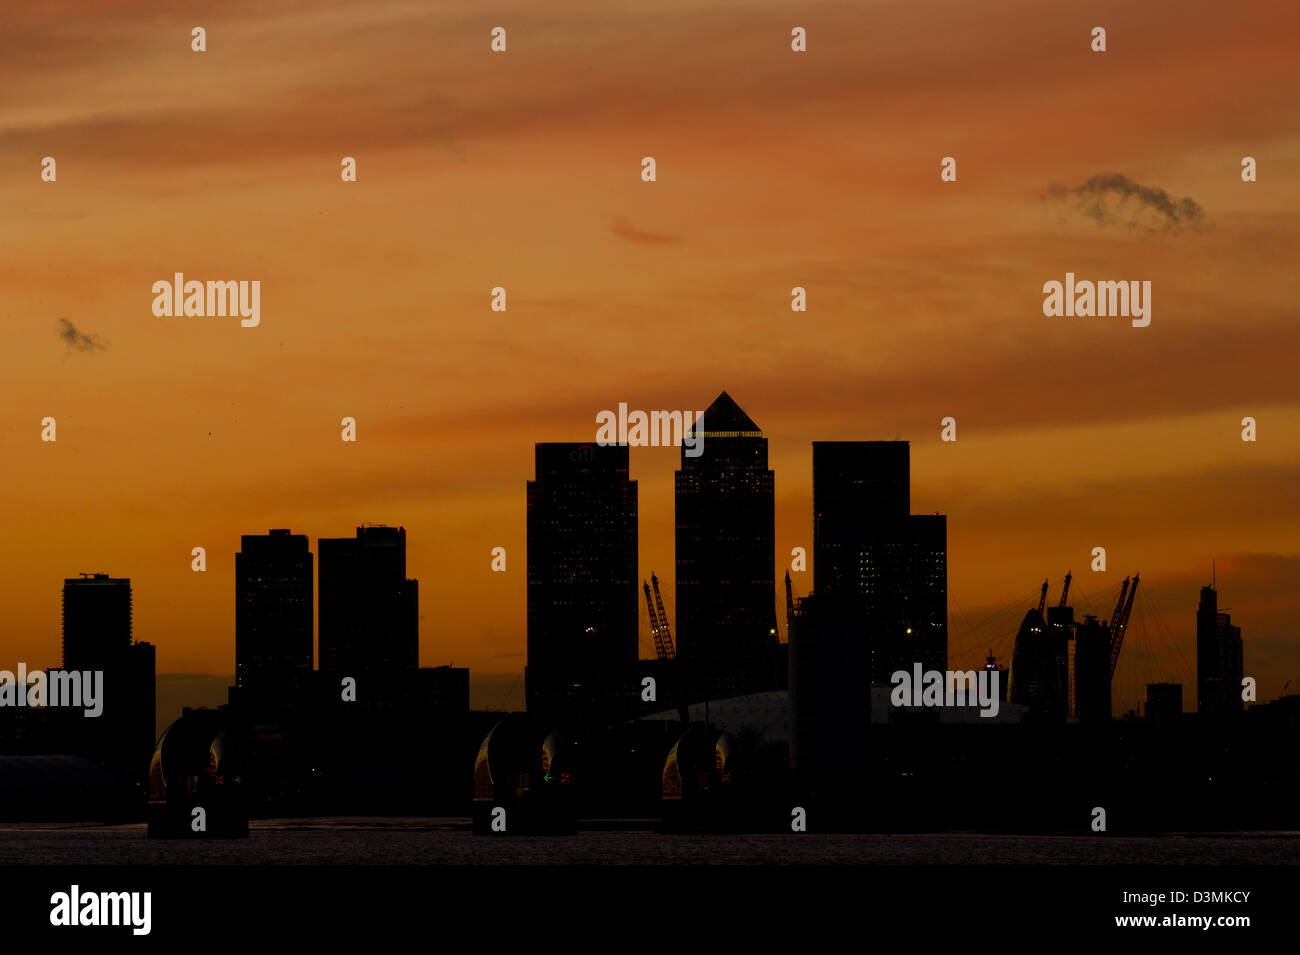 The outline of buildings at Canary Wharf in London are seen in ...